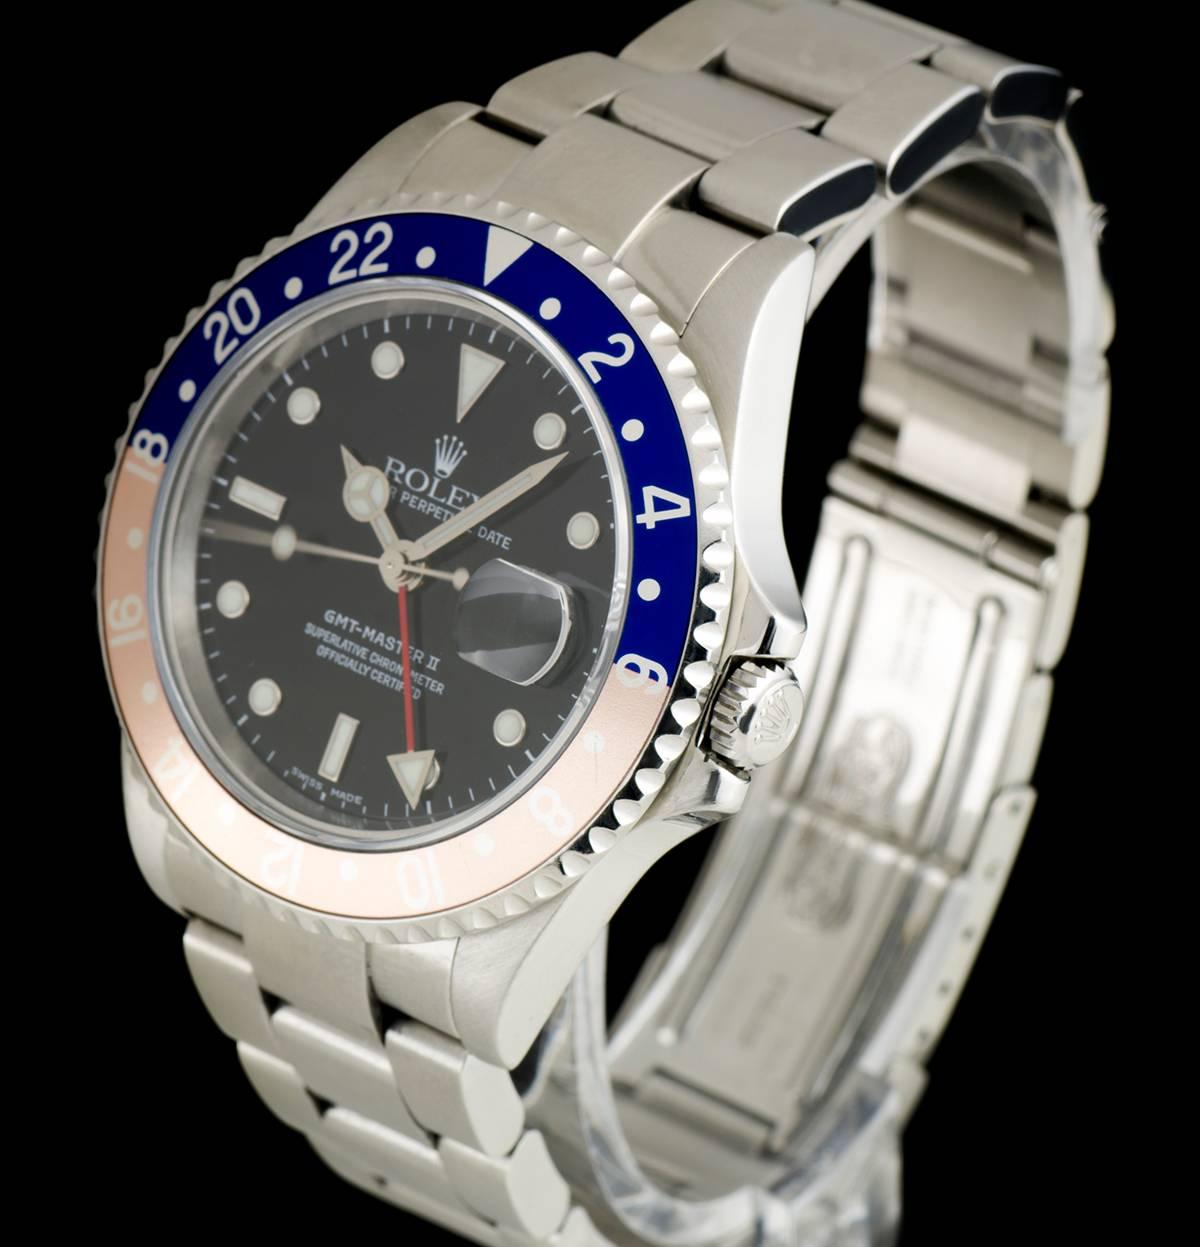 A Stainless Steel Oyster Perpetual GMT-Master II Gents Wristwatch, black dial with applied hour markers, date at 3 0'clock, red GMT hand, a stainless steel bi-directional rotating bezel with a blue and red "pepsi" bezel insert, a stainless